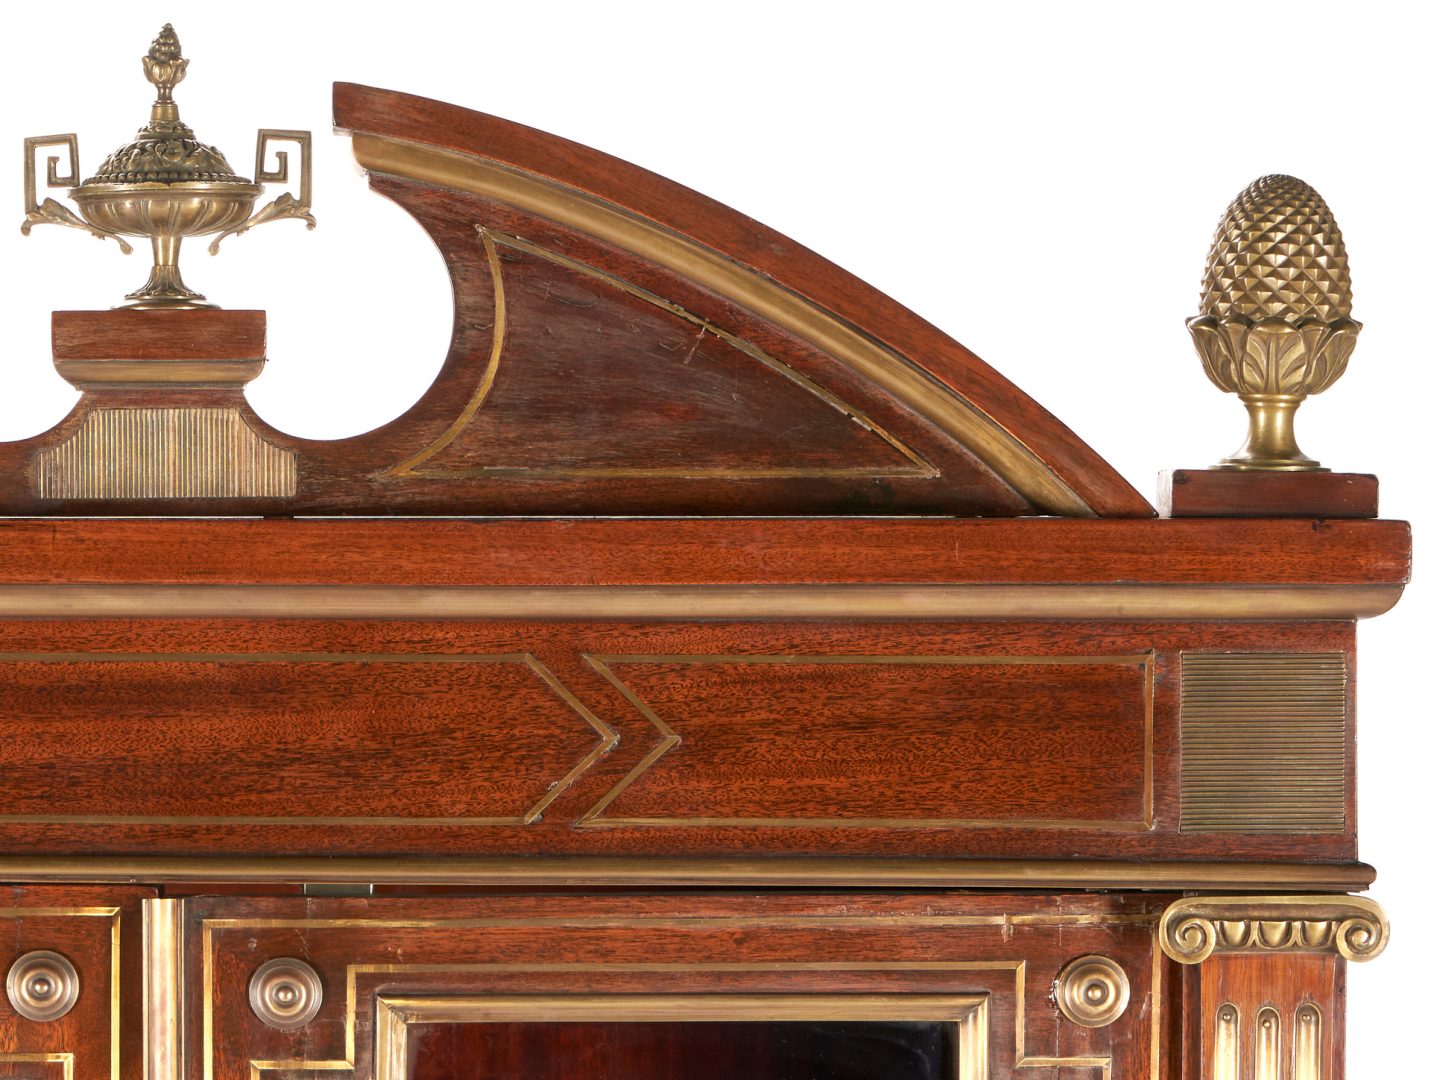 Lot 141: Continental Neoclassical Bibliotheque or Bookcase